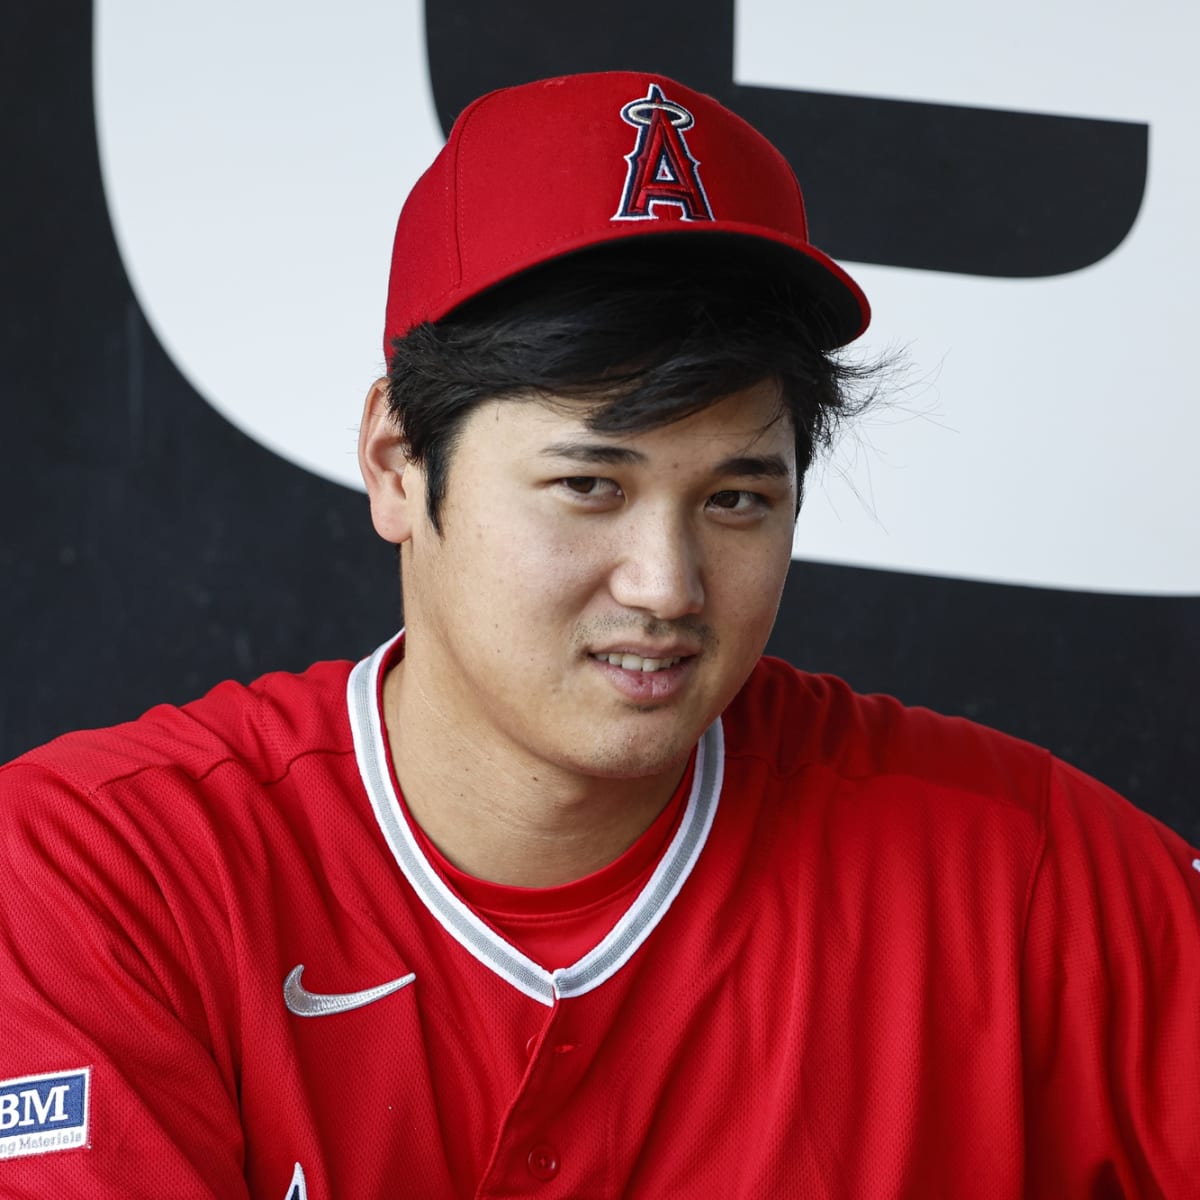 Welcome to the Sho: Slugger, pitcher Shohei Ohtani dazzling Angels fans -  Cronkite News